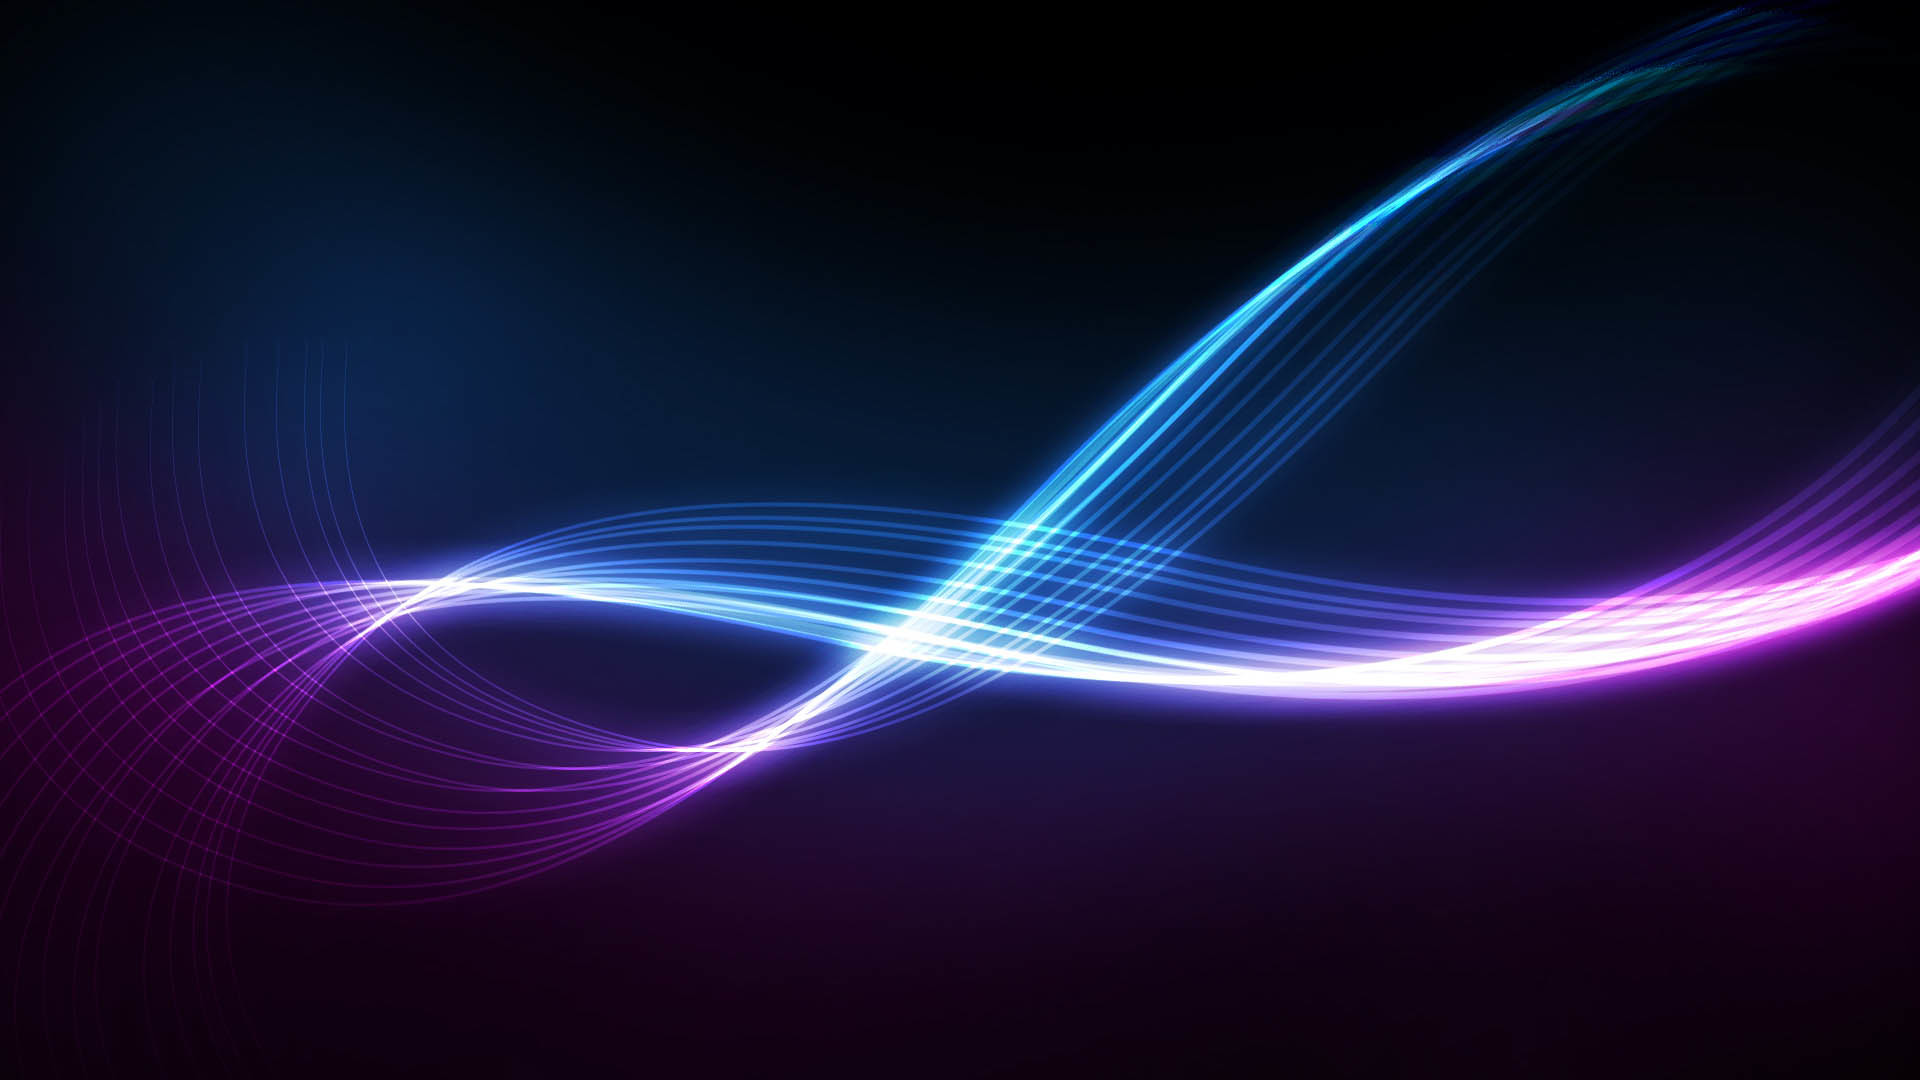 1920x1080 Abstract 1080p - Wallpaper, High Definition, High Quality, Widescreen